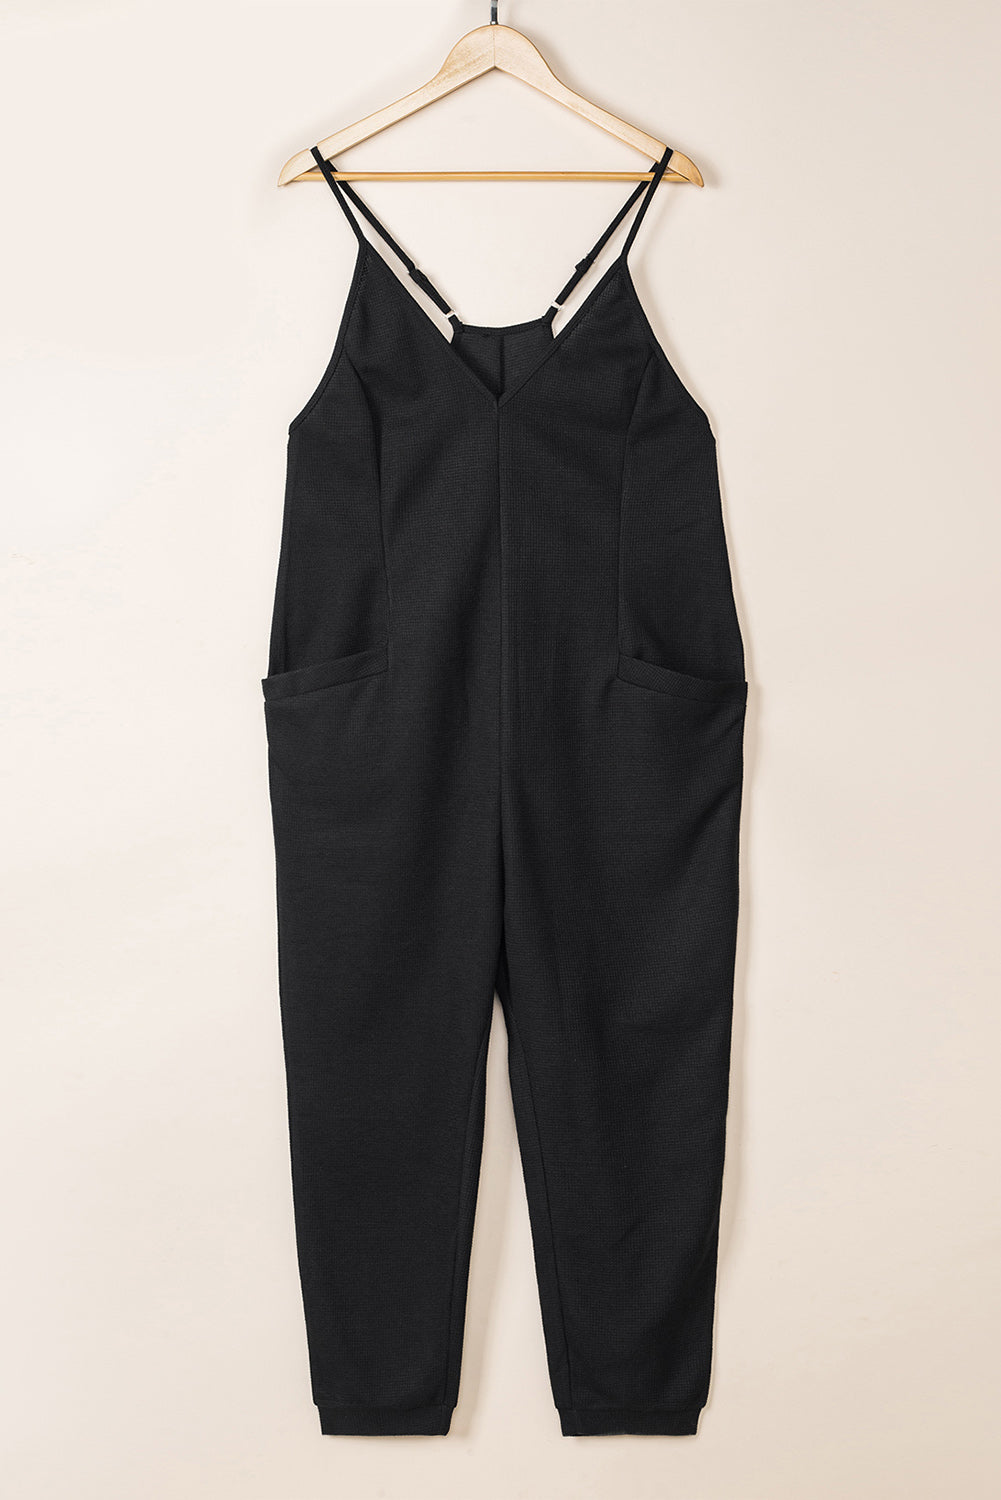 Black Textured Sleeveless V-Neck Pocketed Casual Jumpsuit